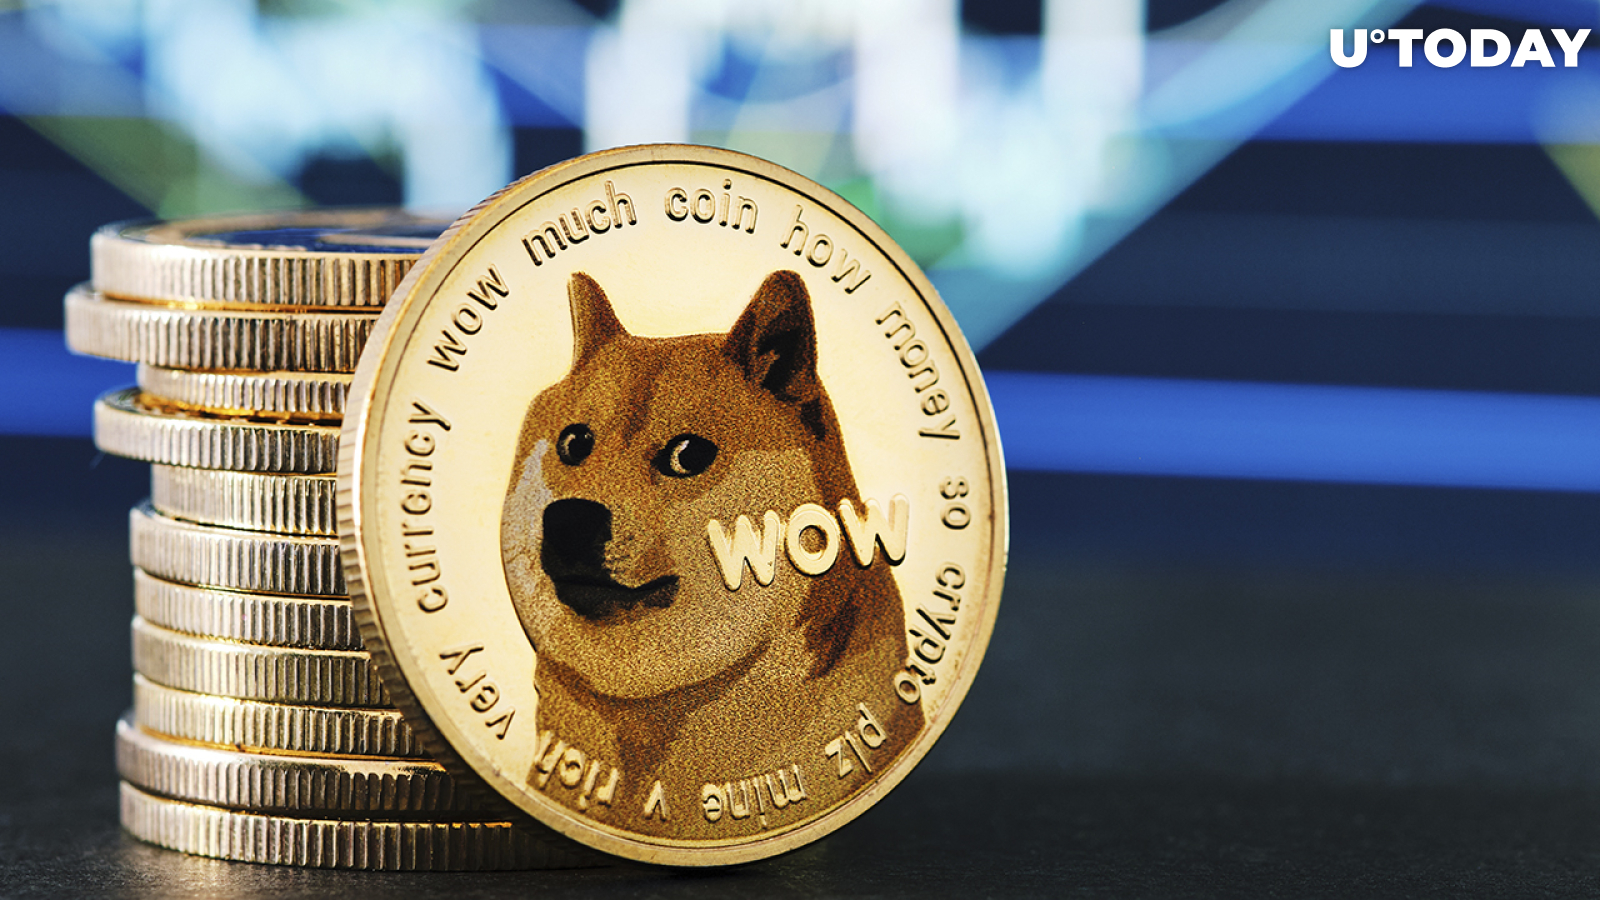 Dogecoin Reaches New Milestone in Holders, Top Whales Accumulate 324 Million DOGE